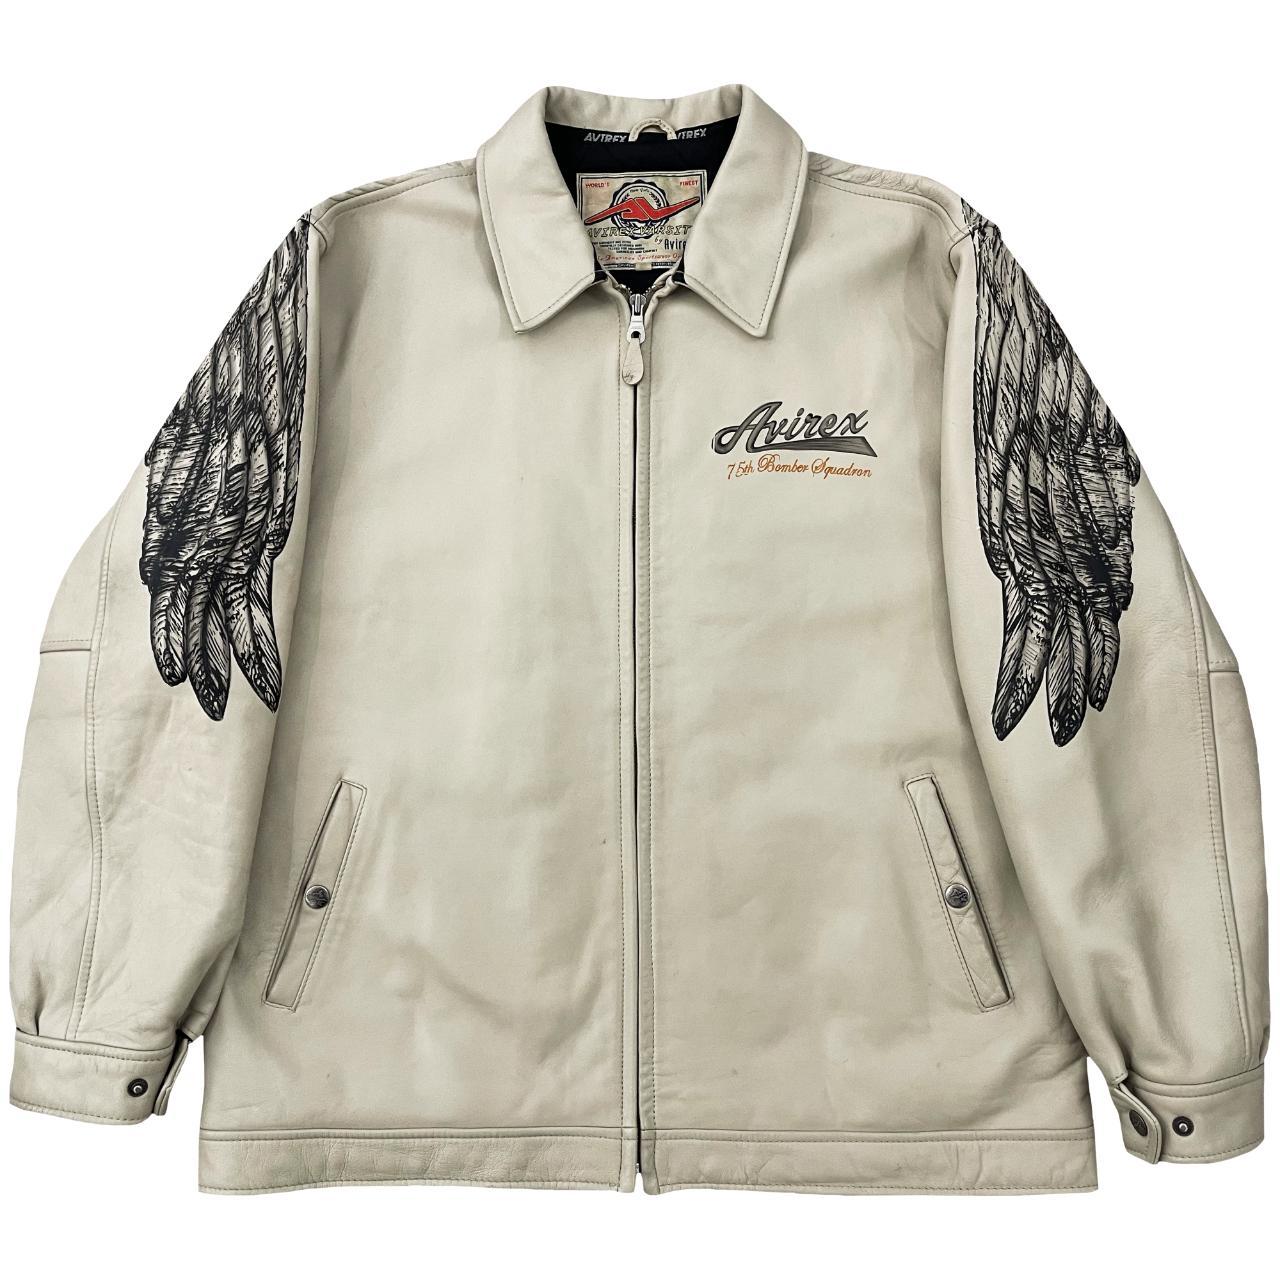 Avirex Leather Angel Wing Painted Jacket, Soft high